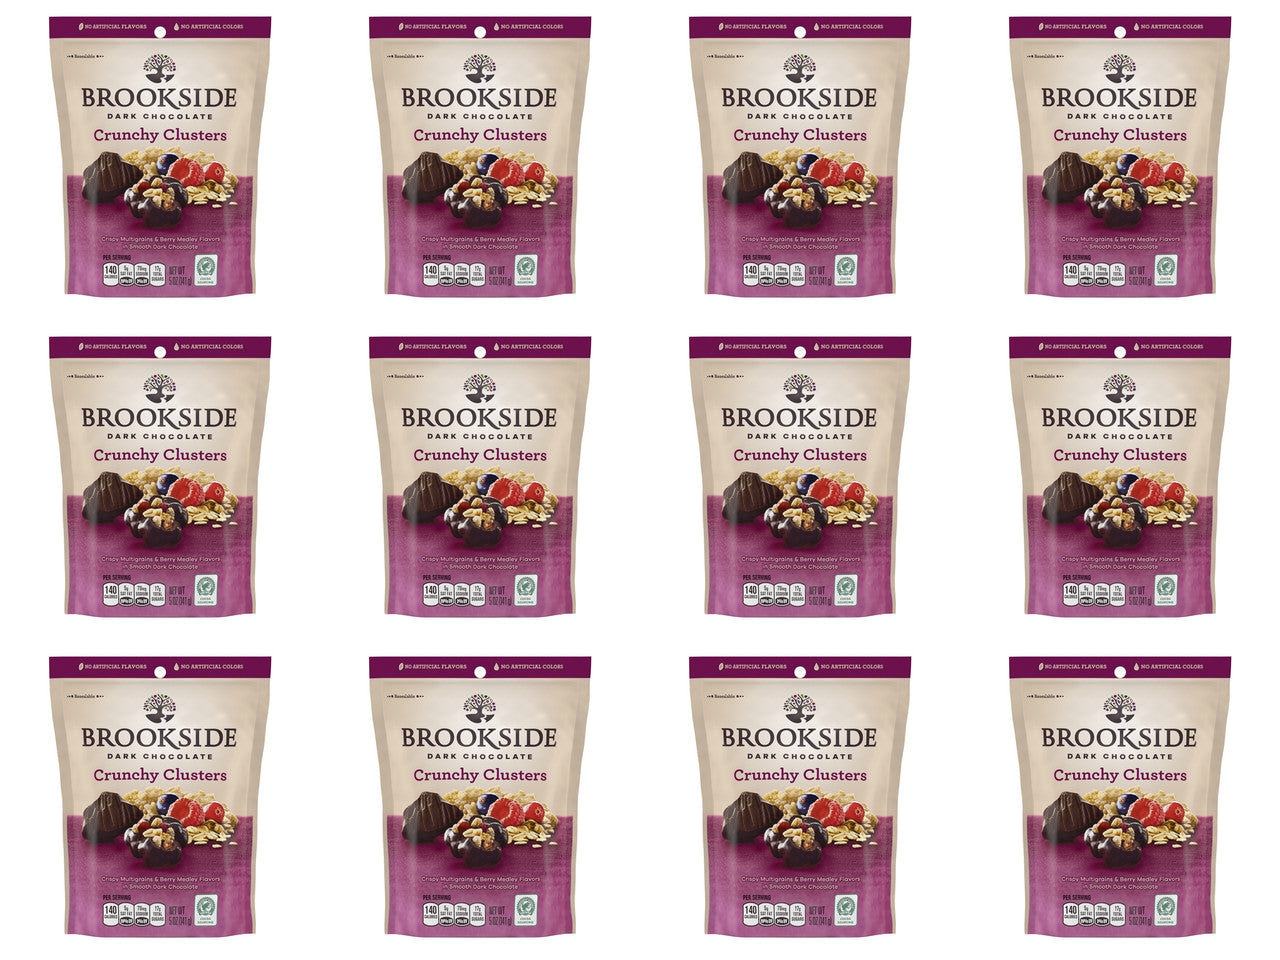 BROOKSIDE Dark Chocolate Crunchy Clusters, Berry Medley, 167g/5.9 oz., (Pack of 12)